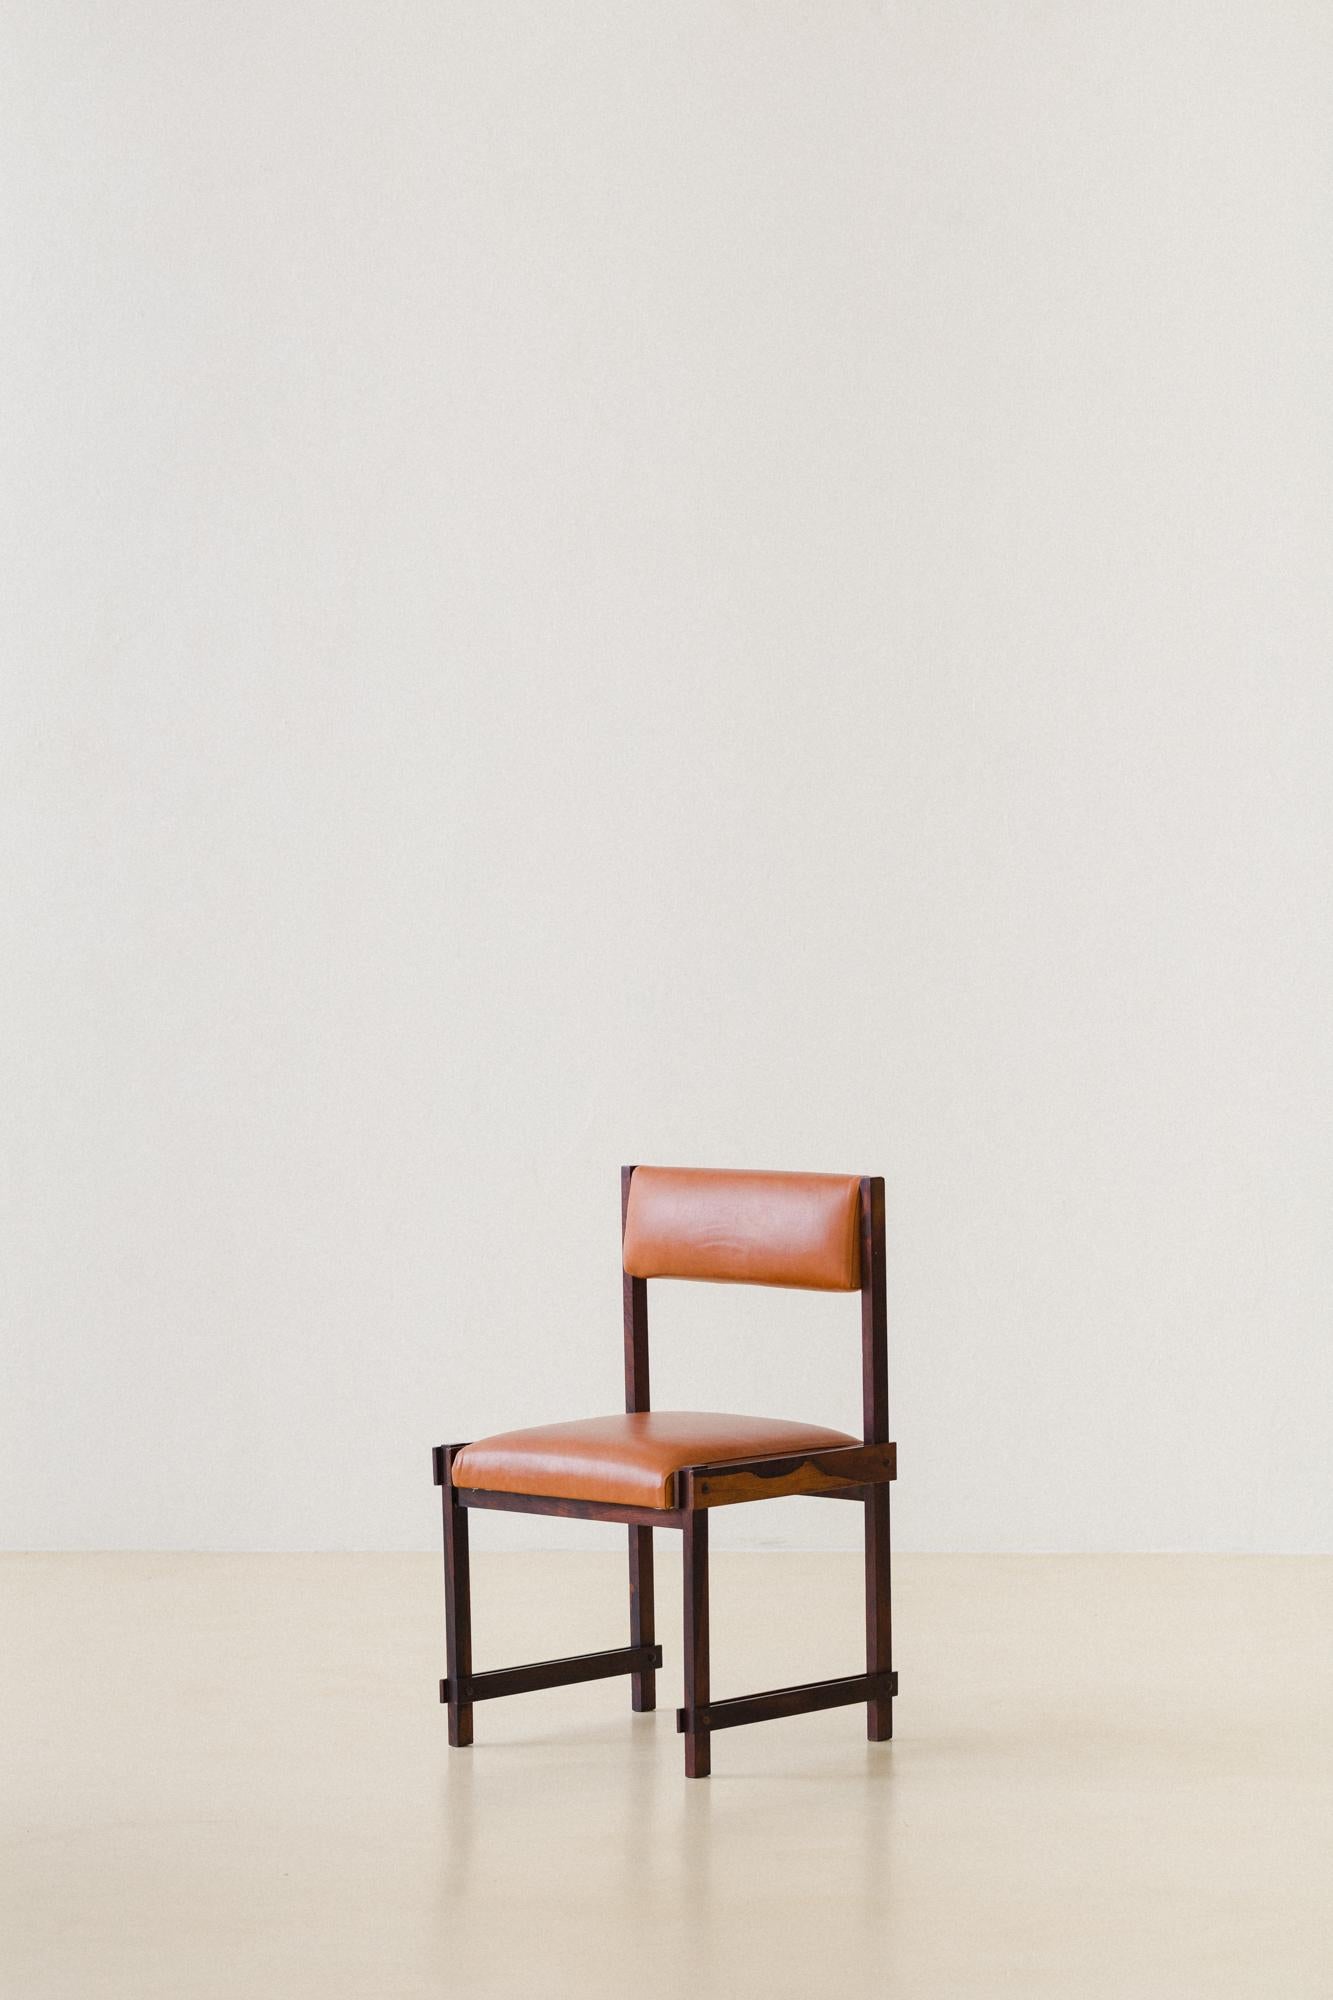 Mid-20th Century Brazilian Rosewood Dining Chairs by FAI 'Fatima Arquitetura Interiores', 1960s For Sale